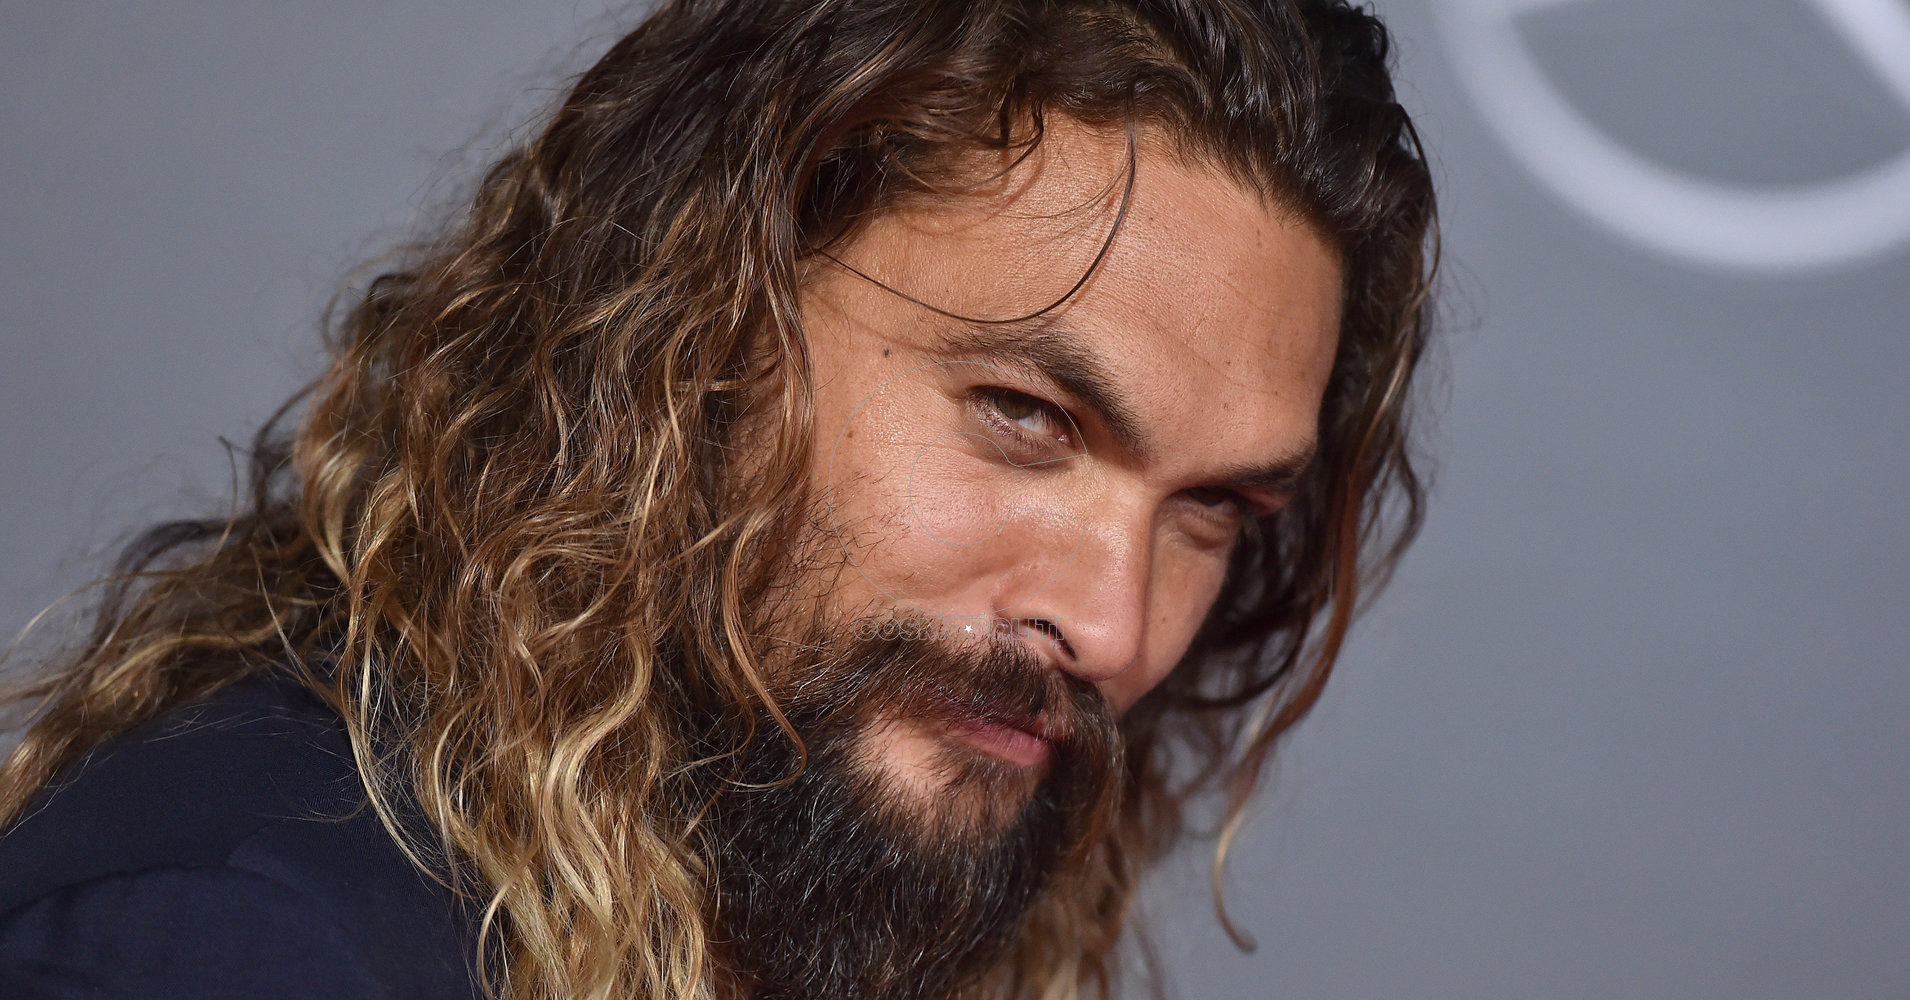 HOLLYWOOD, CA - NOVEMBER 13: Actor Jason Momoa arrives at the premiere of Warner Bros. Pictures' 'Justice League' at Dolby Theatre on November 13, 2017 in Hollywood, California. (Photo by Axelle/Bauer-Griffin/FilmMagic)